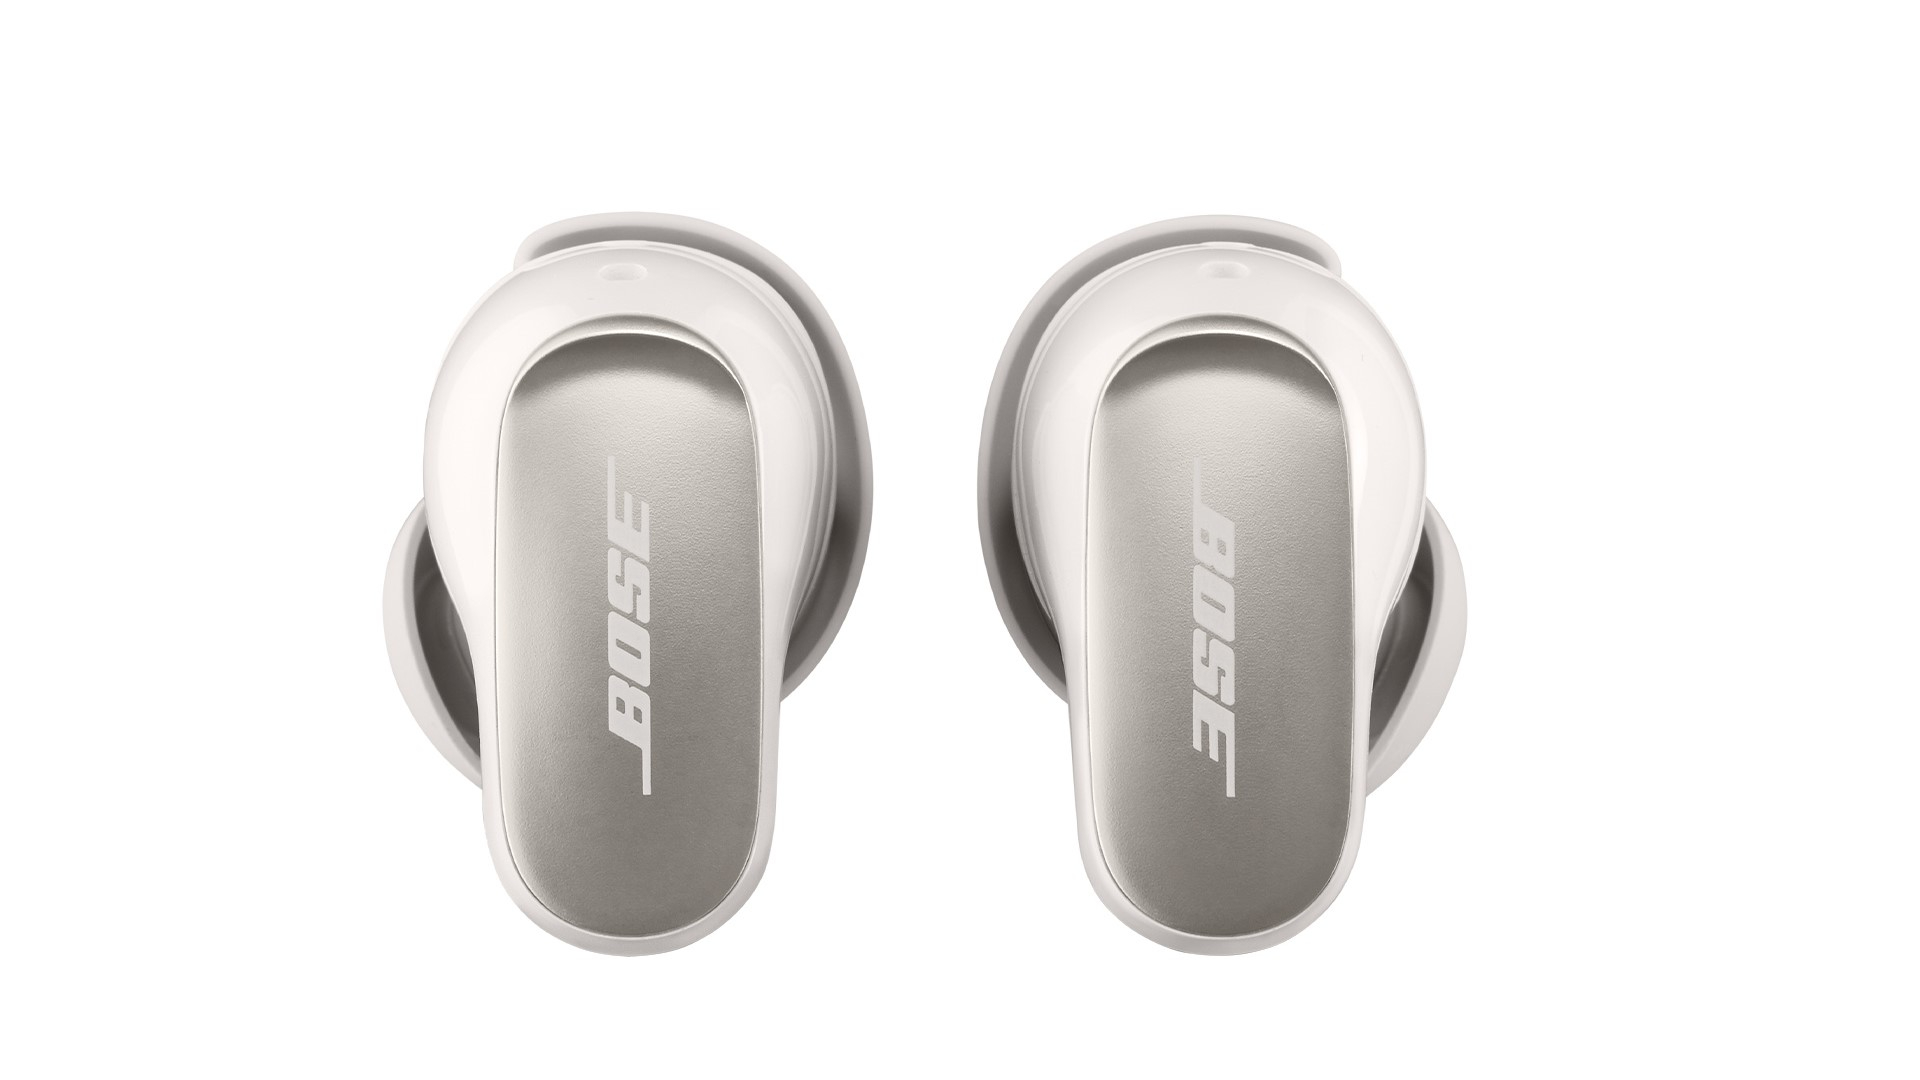 Bose QuietComfort Ultra on a white background.